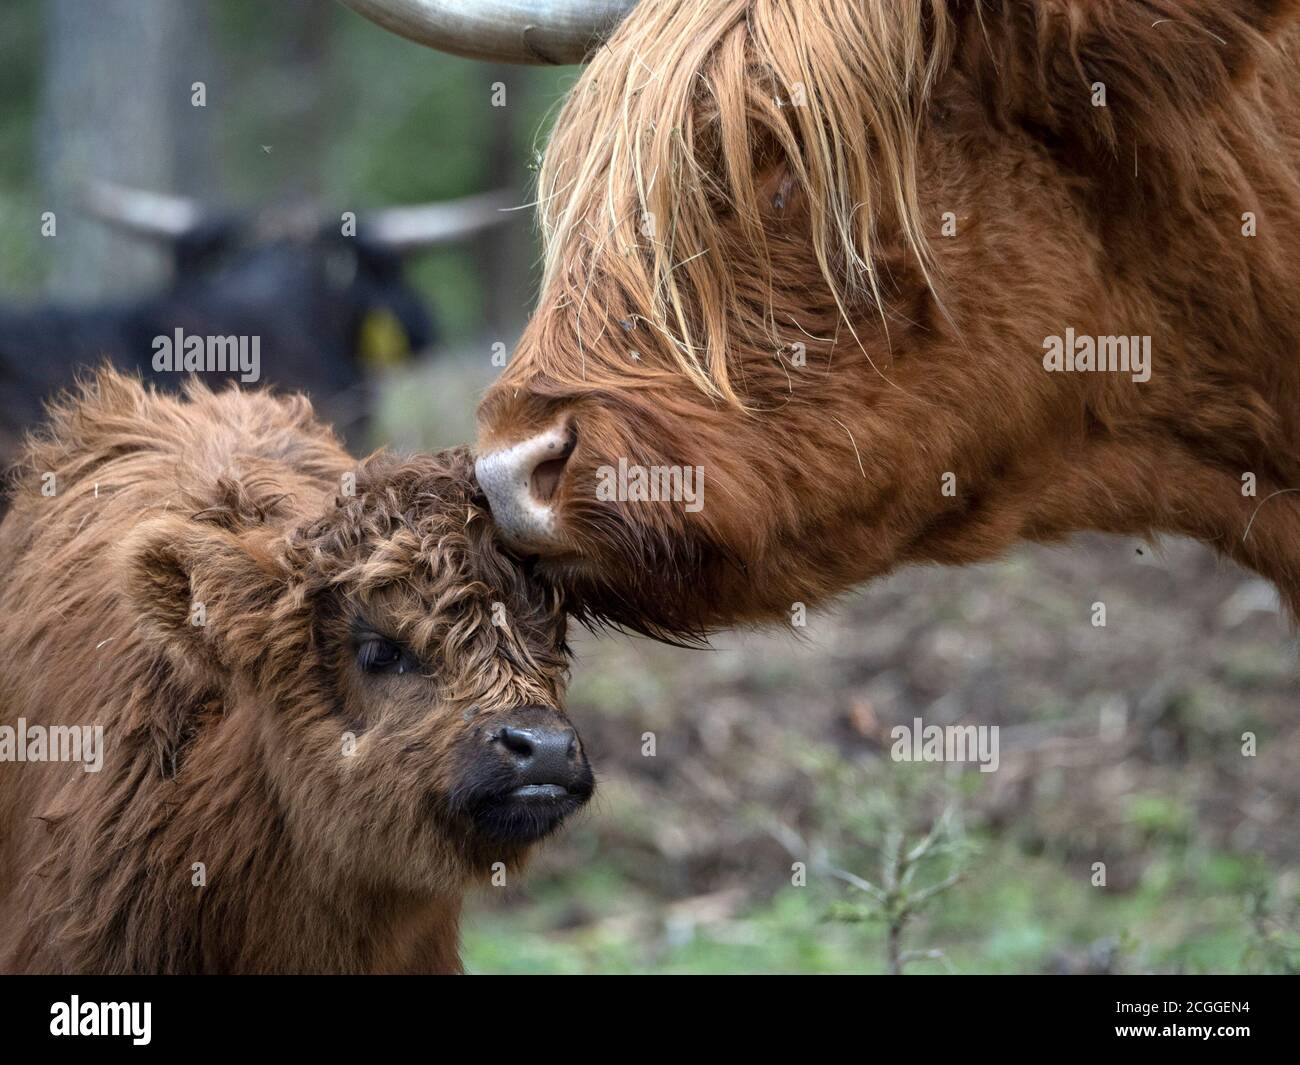 baby Highlander scotland hairy cow with mother in forest Stock Photo